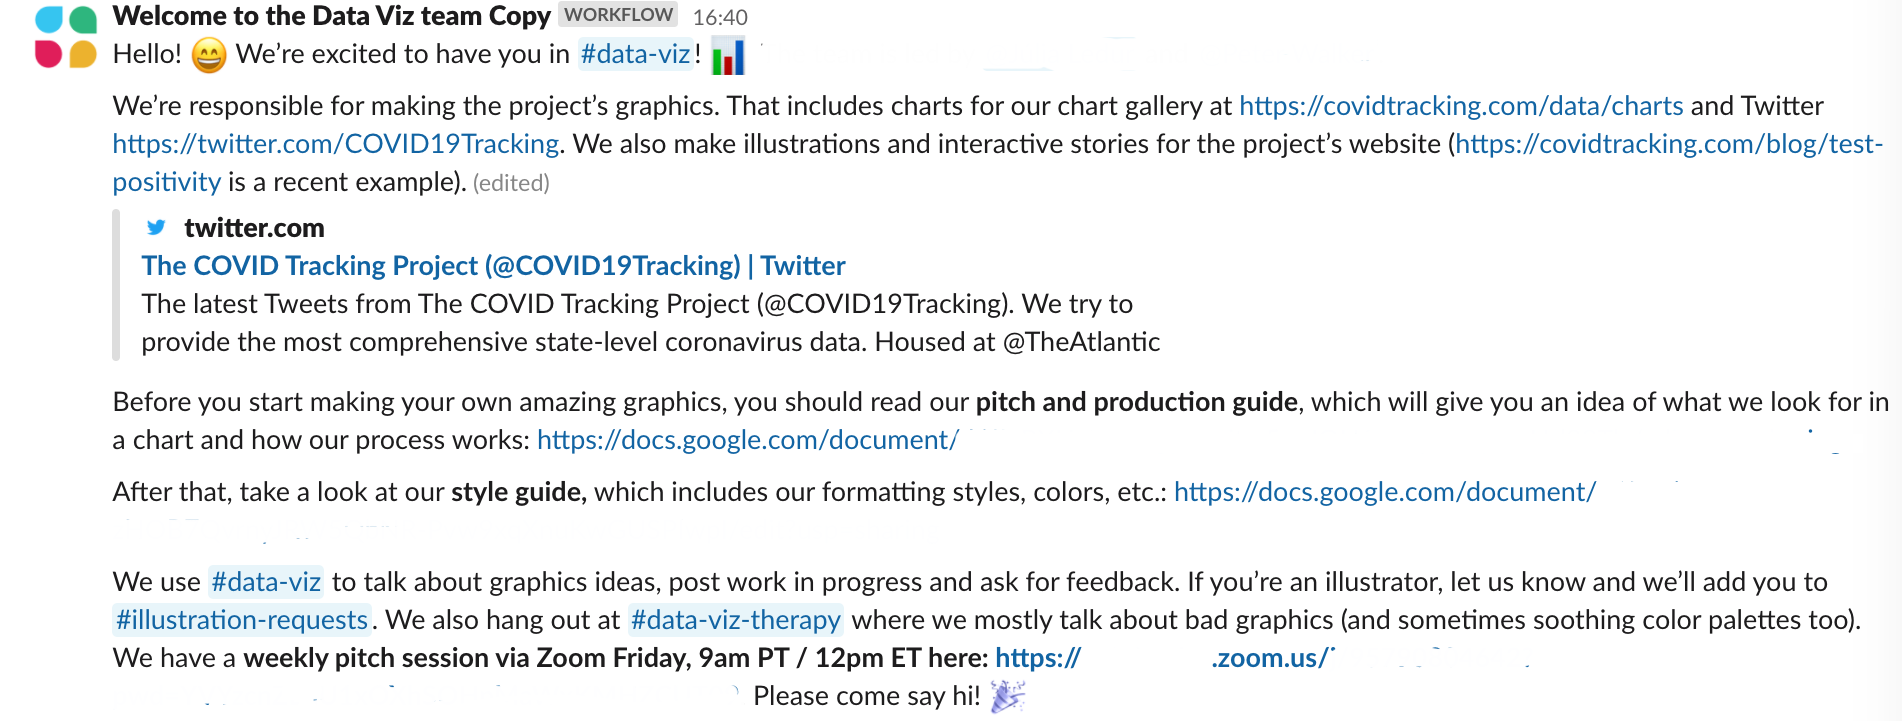 Screenshot of a Slack message welcoming a new volunteer to the Data Viz team. The message explains that the purpose and responsibilities of the Data Viz team includes making charts, illustrations, and interactive stories and asks the volunteers to read the Data Viz pitch and production guide. The message also gives the time, date, and redacted teleconference link for the weekly team meeting.